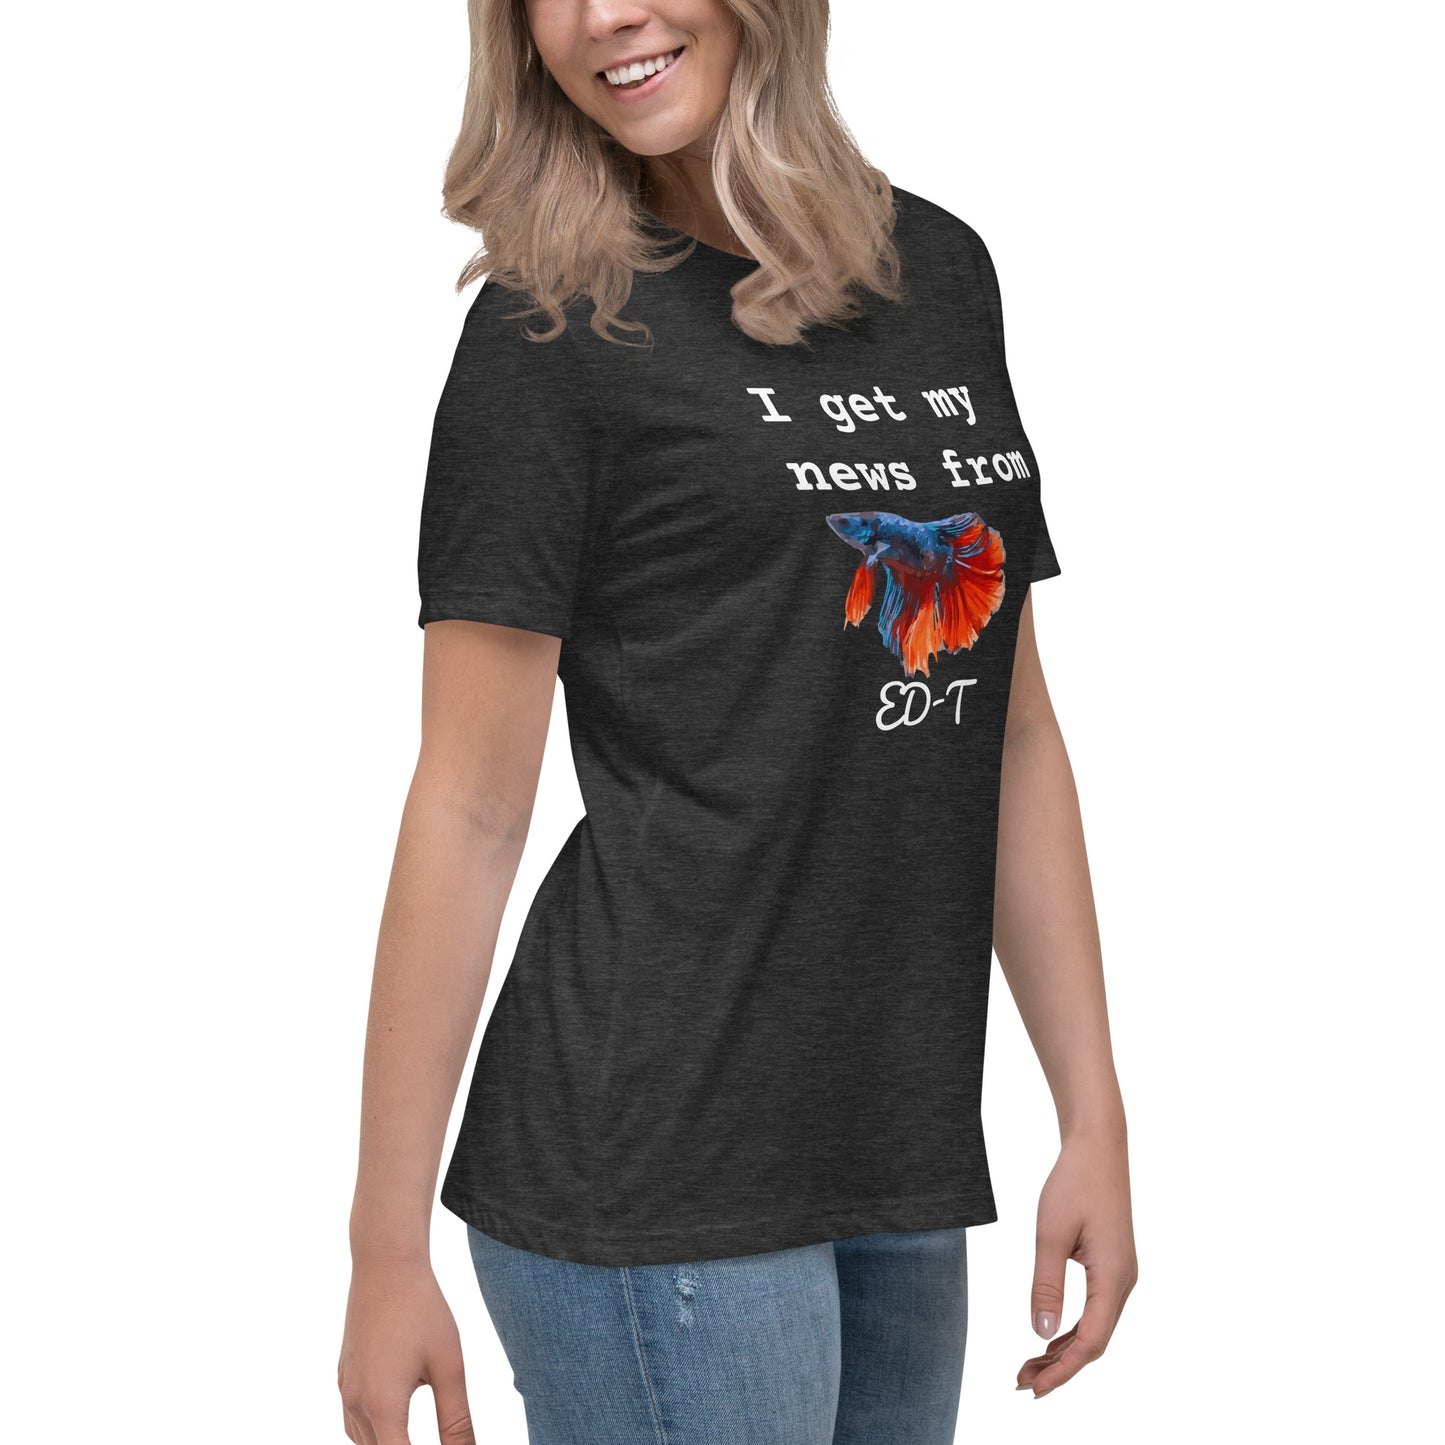 I get my news from ED-T Women's T-shirt